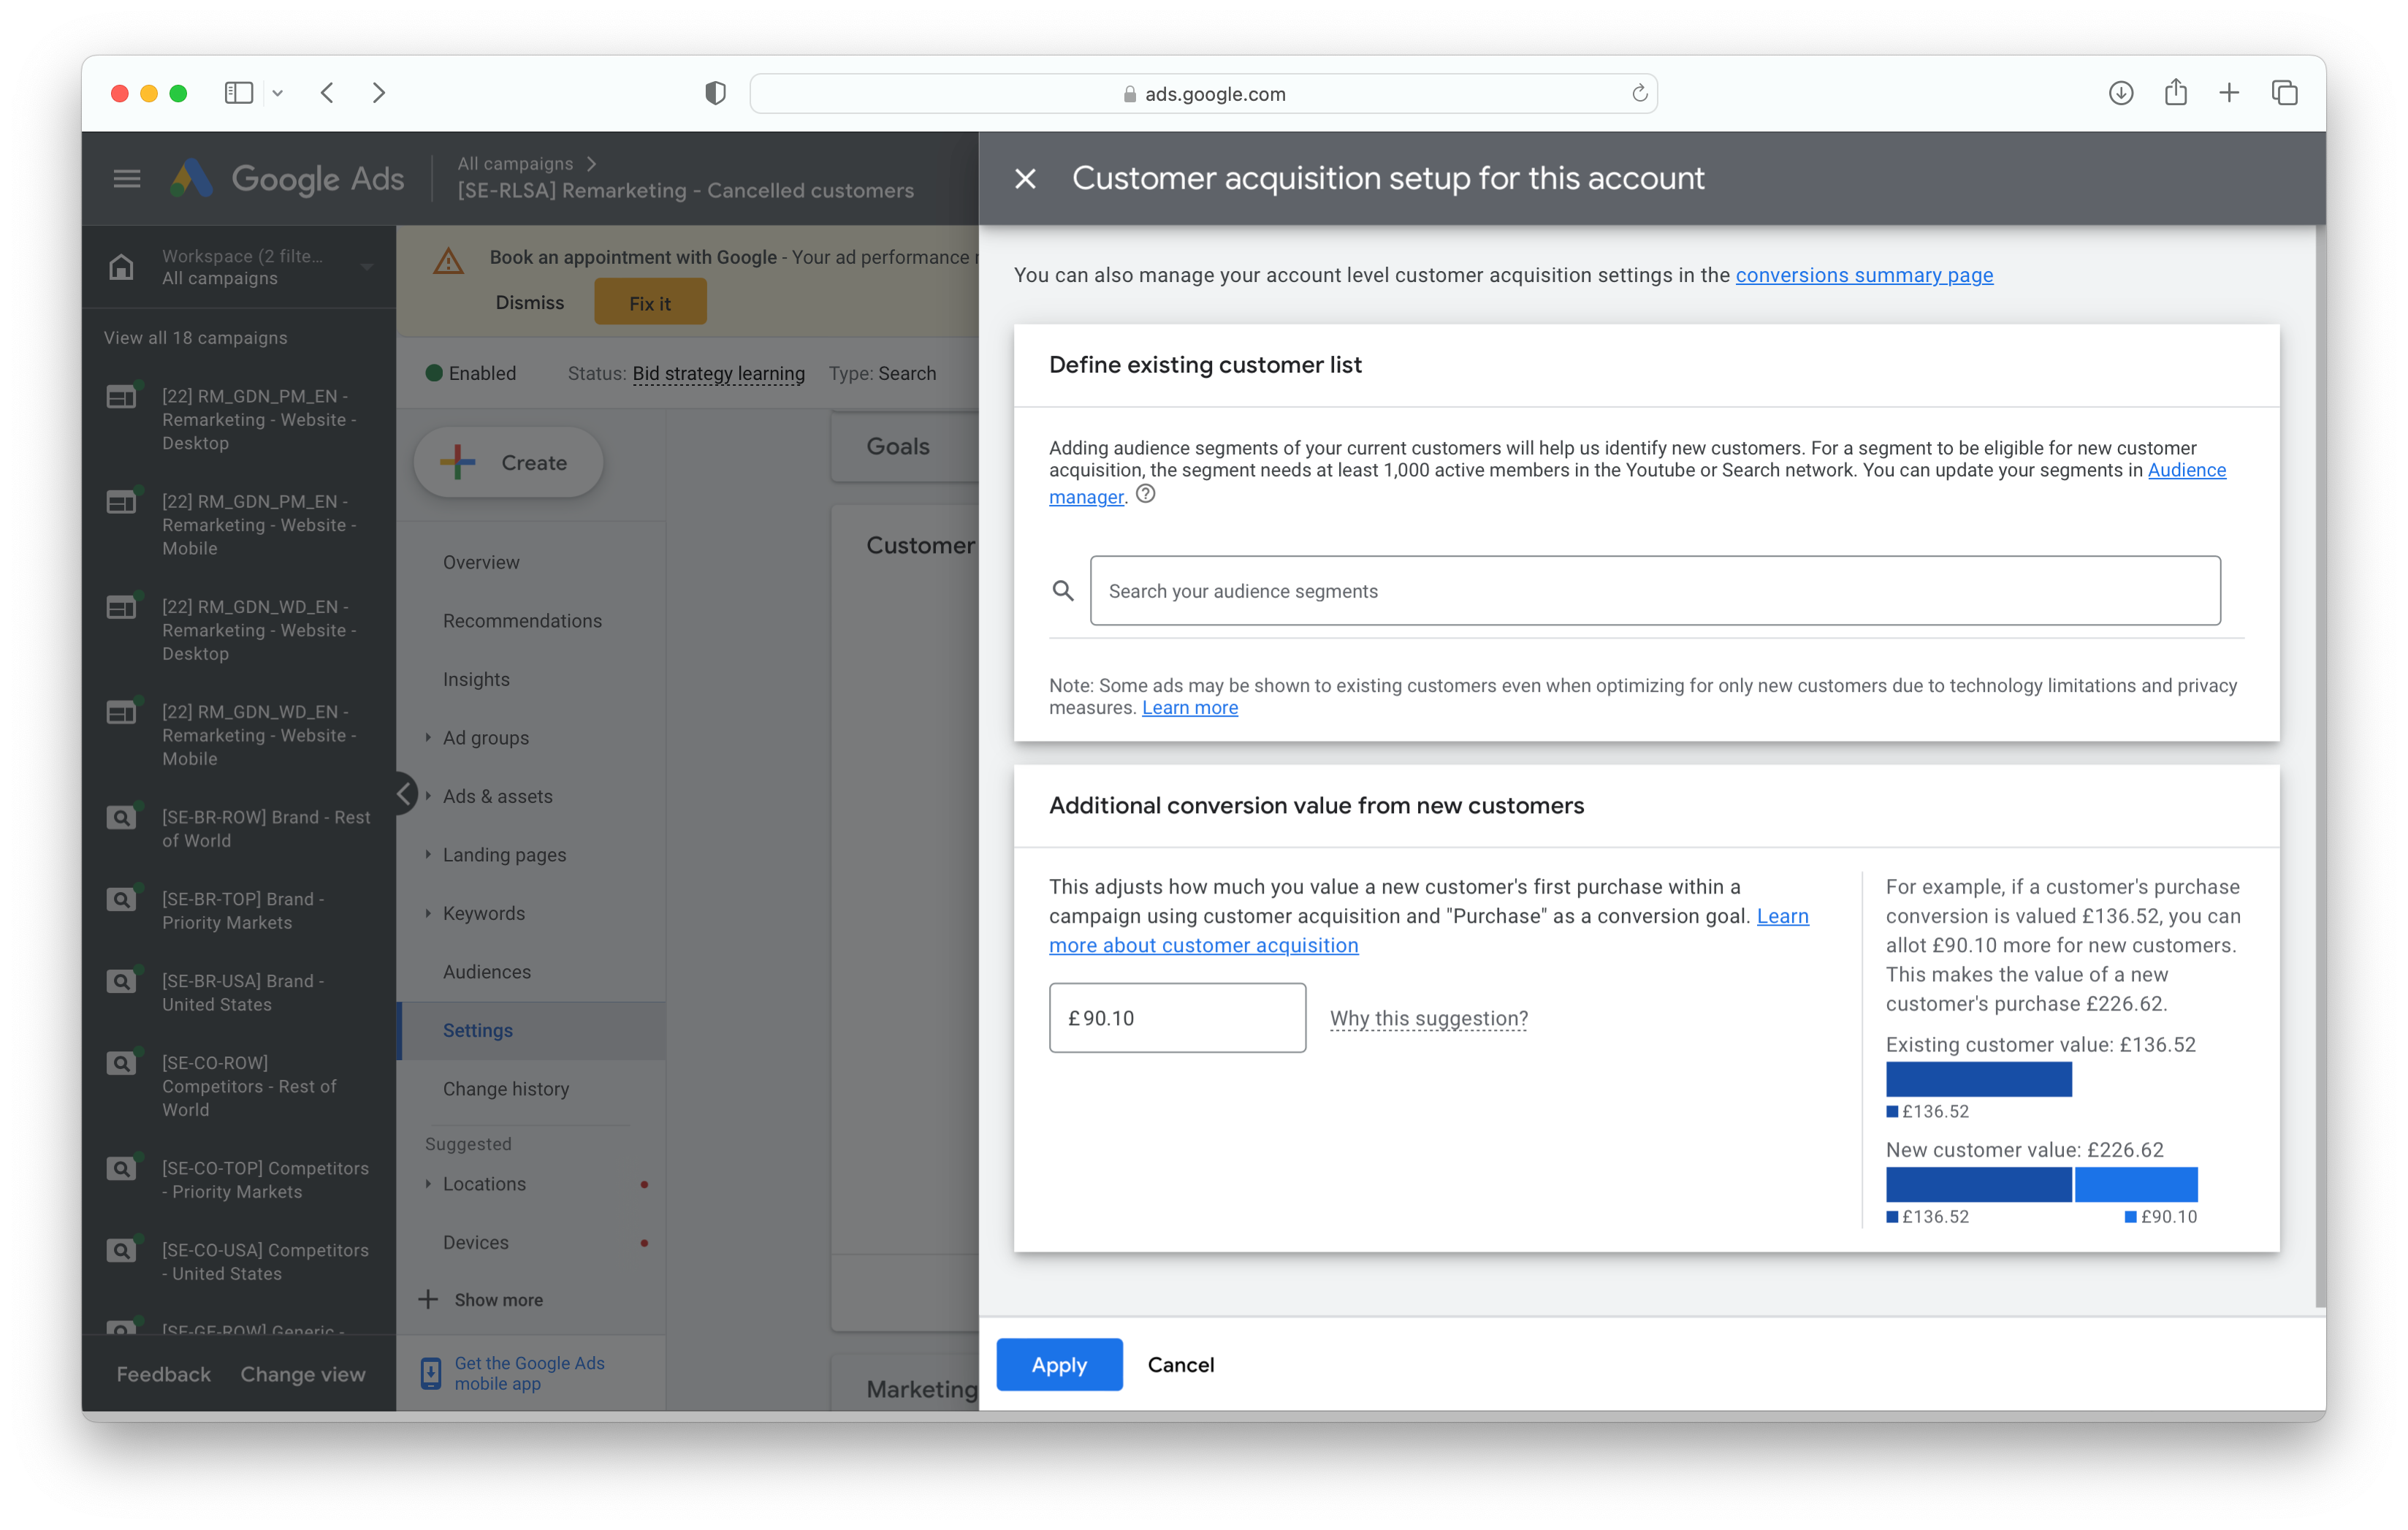 UI for setting up "Customer acquisition" in the campaign settings flow